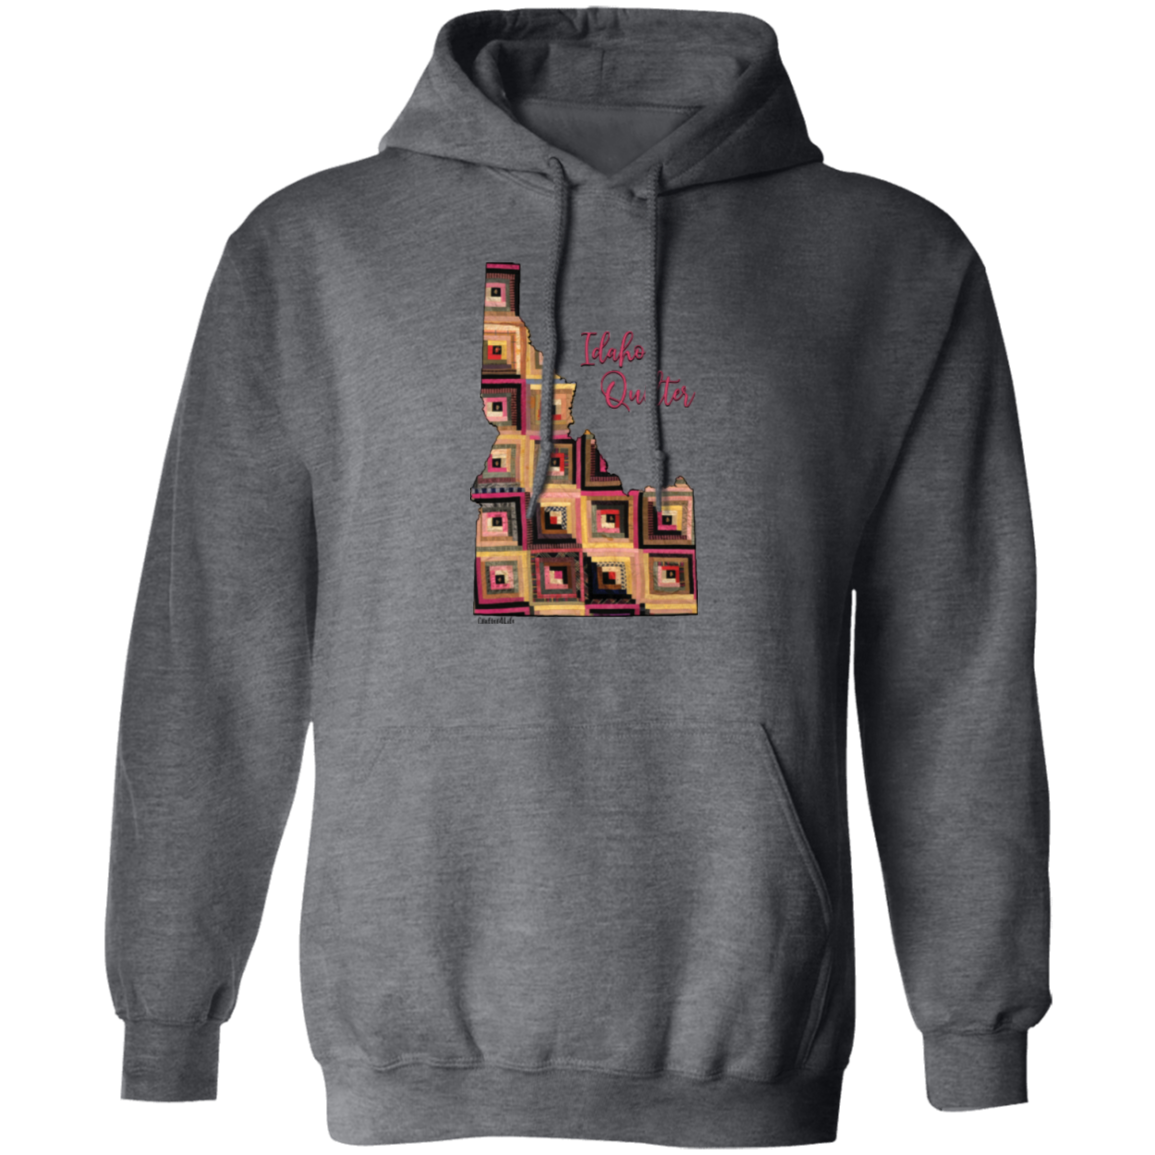 Idaho Quilter Pullover Hoodie, Gift for Quilting Friends and Family